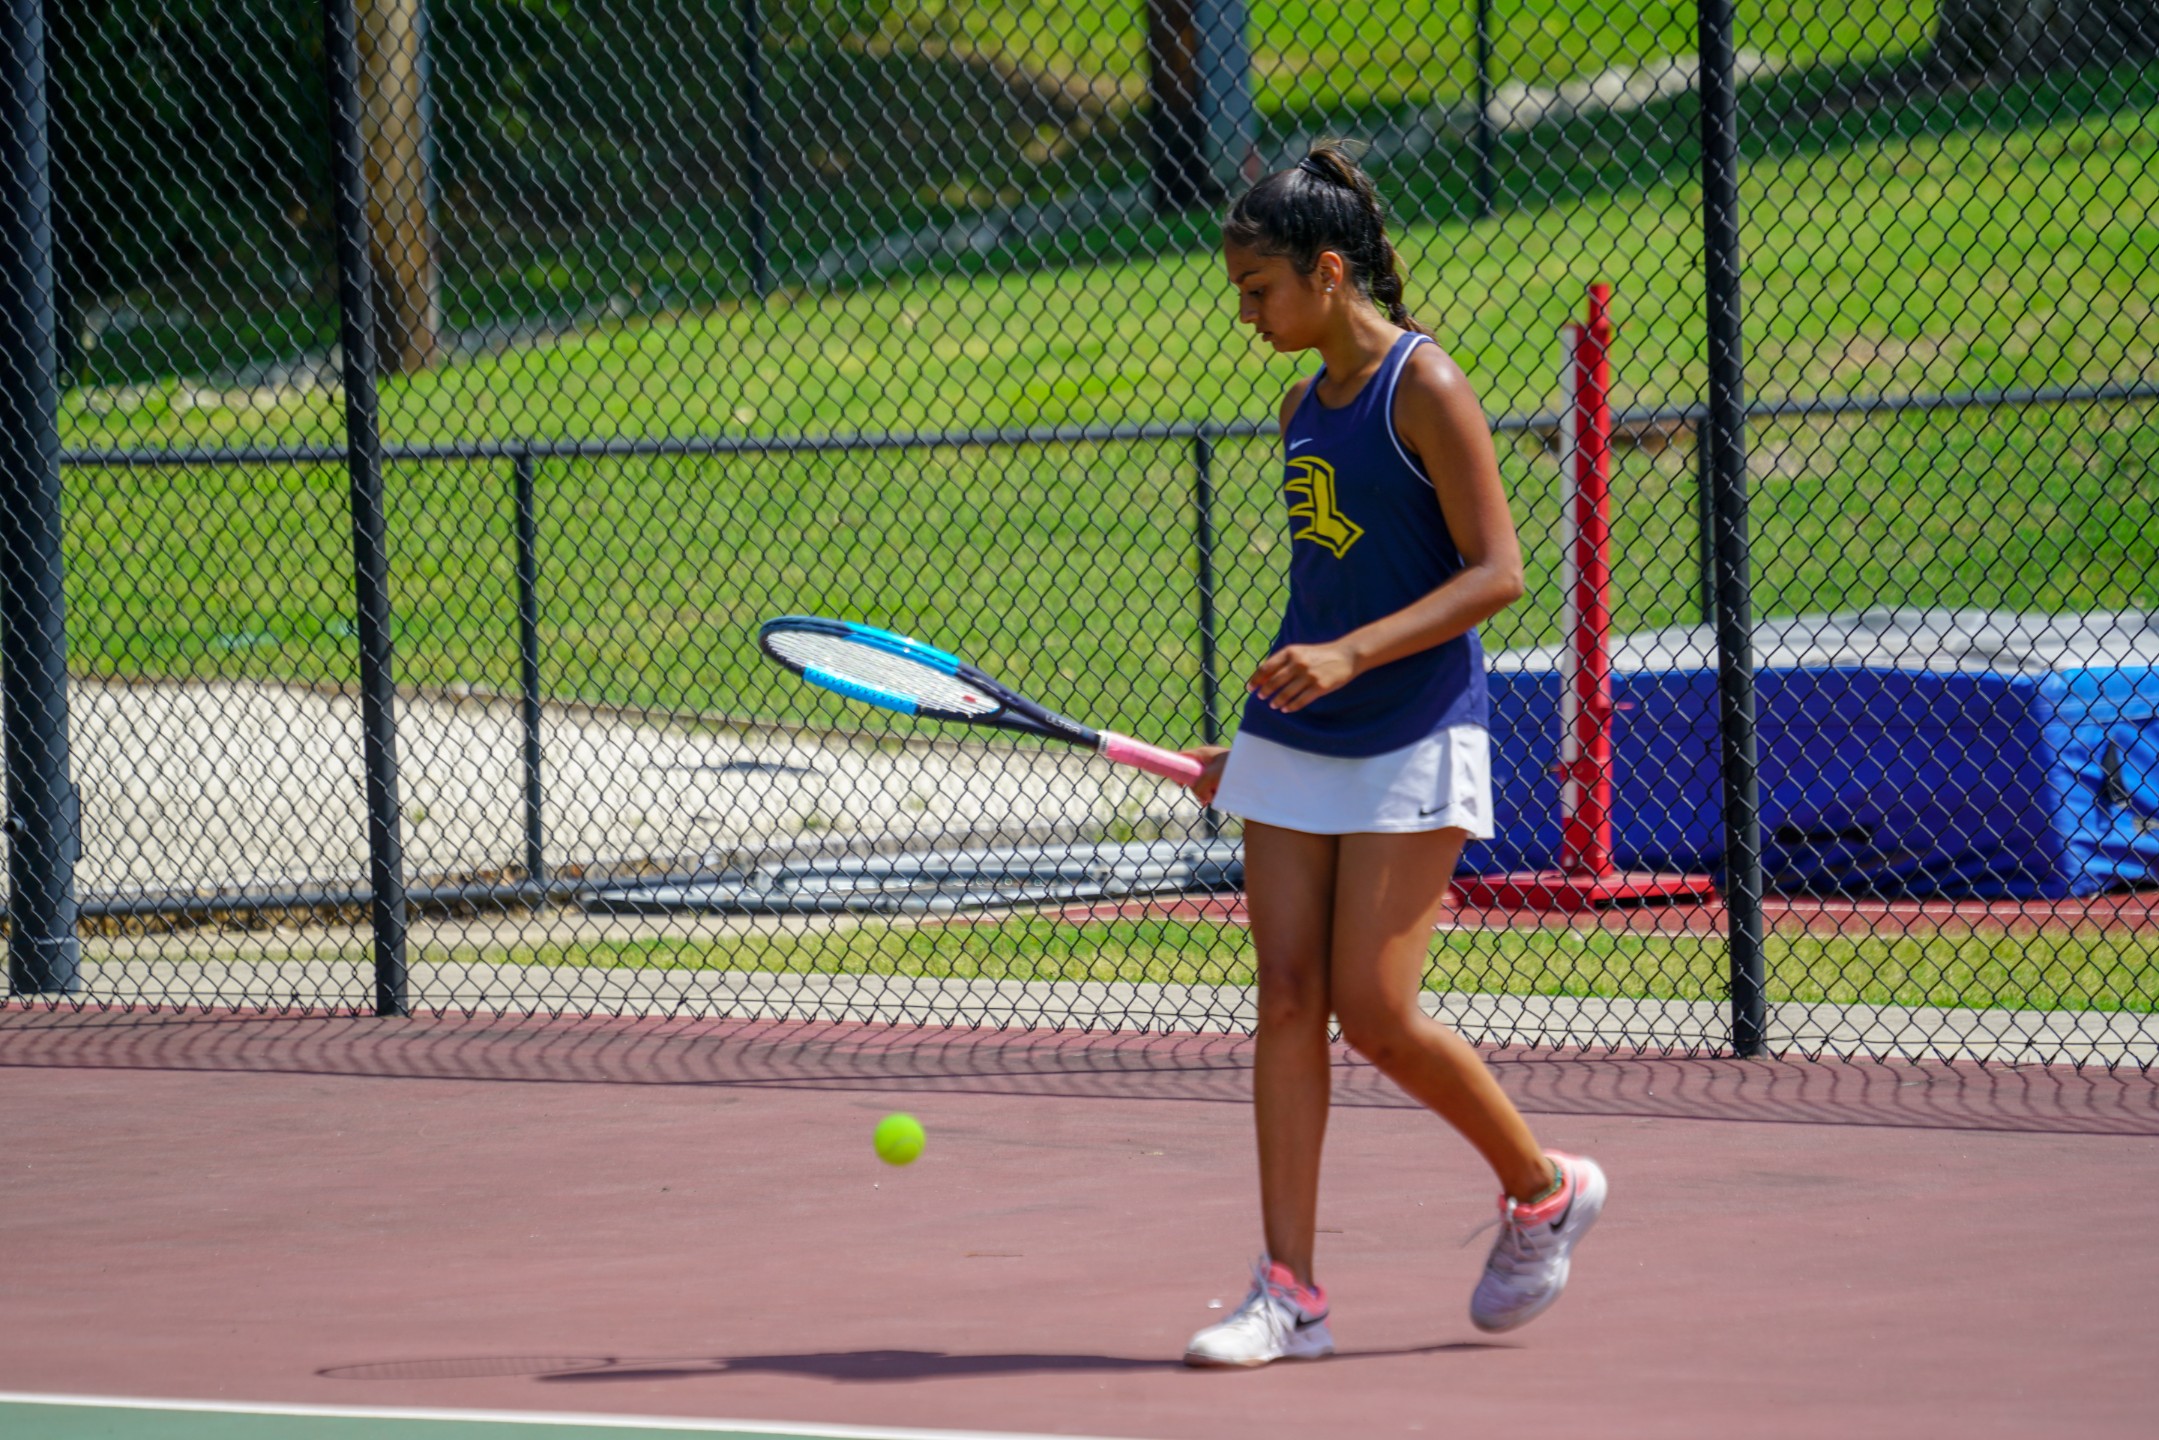 Female student during tennis match